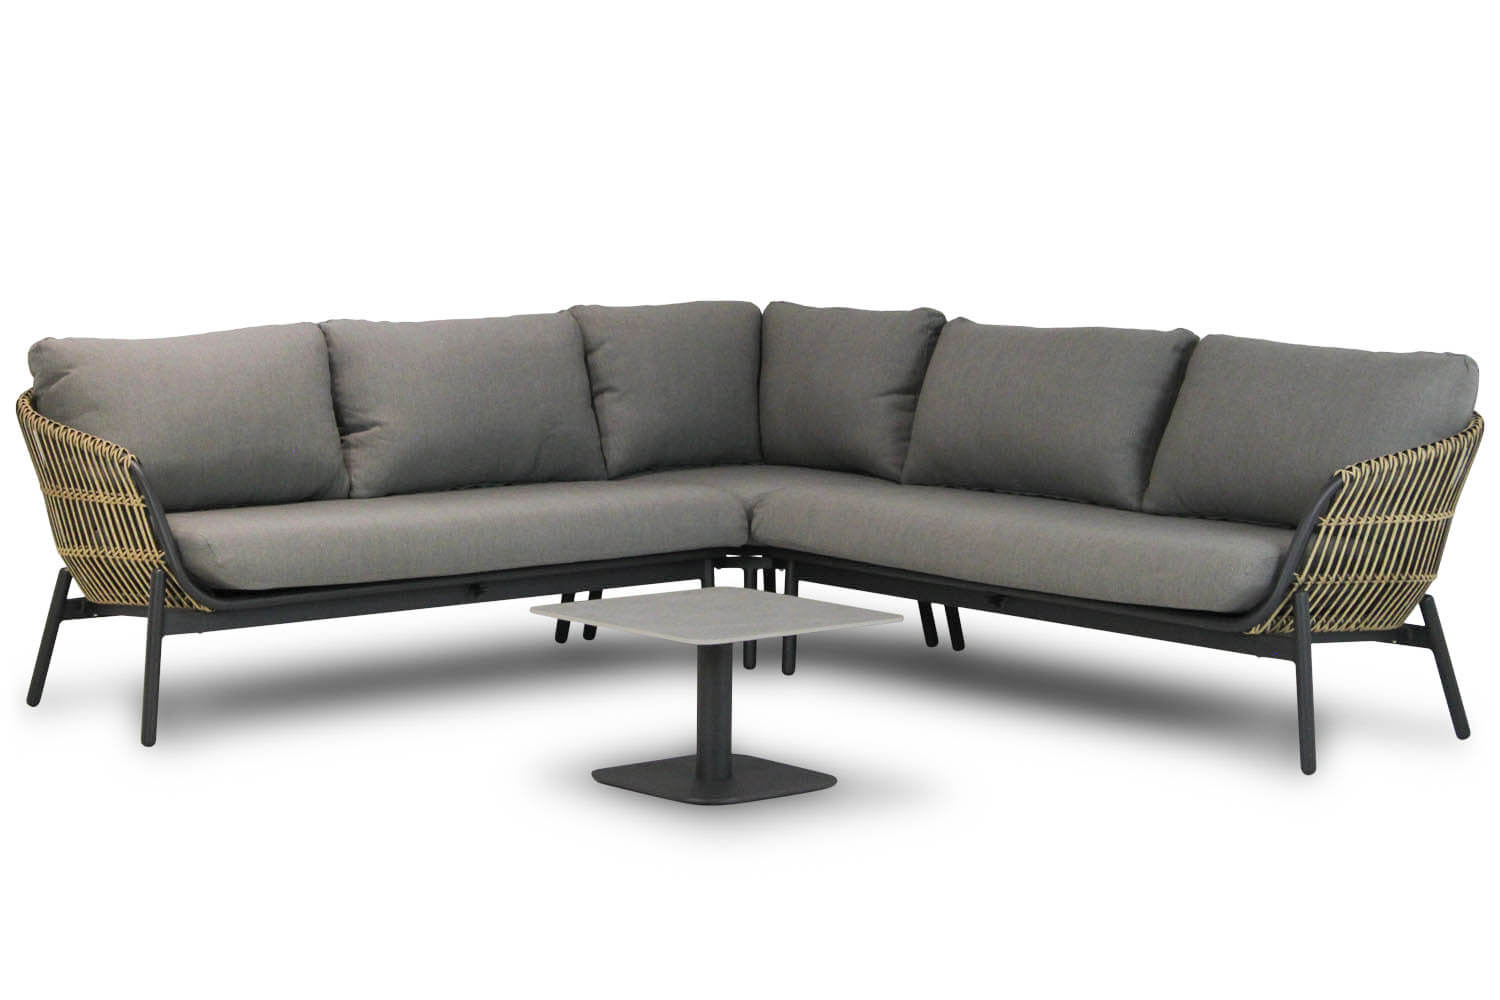 coco nathan loungeset ralph 60 - Coco Nathan/Ralph 60 cm hoek loungeset 4-delig